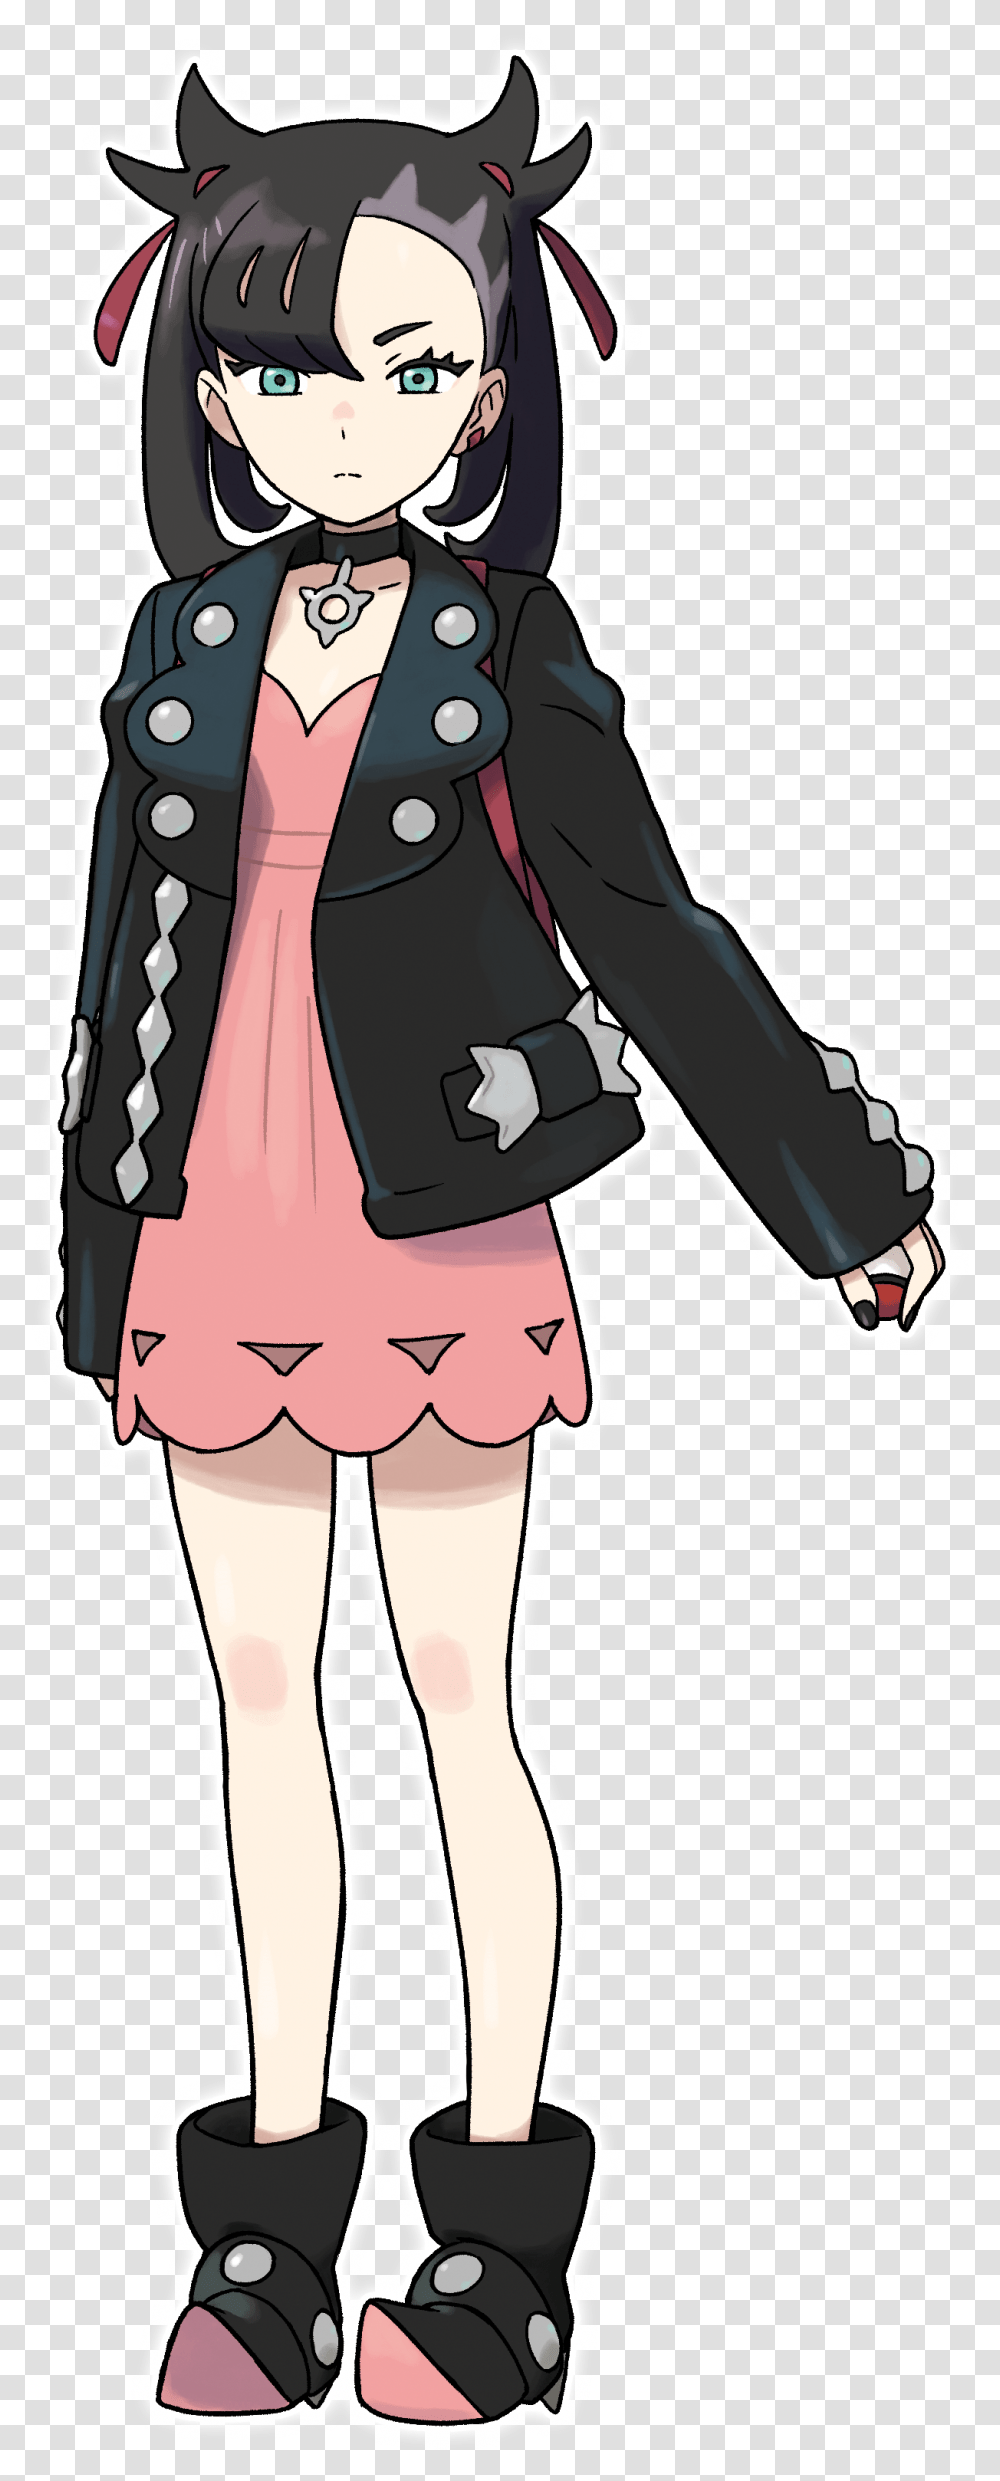 Marnie Render Pokemon Sword And Shieldpng Renders Aiktry Pokemon Rivals Sword And Shield, Clothing, Person, Coat, Overcoat Transparent Png